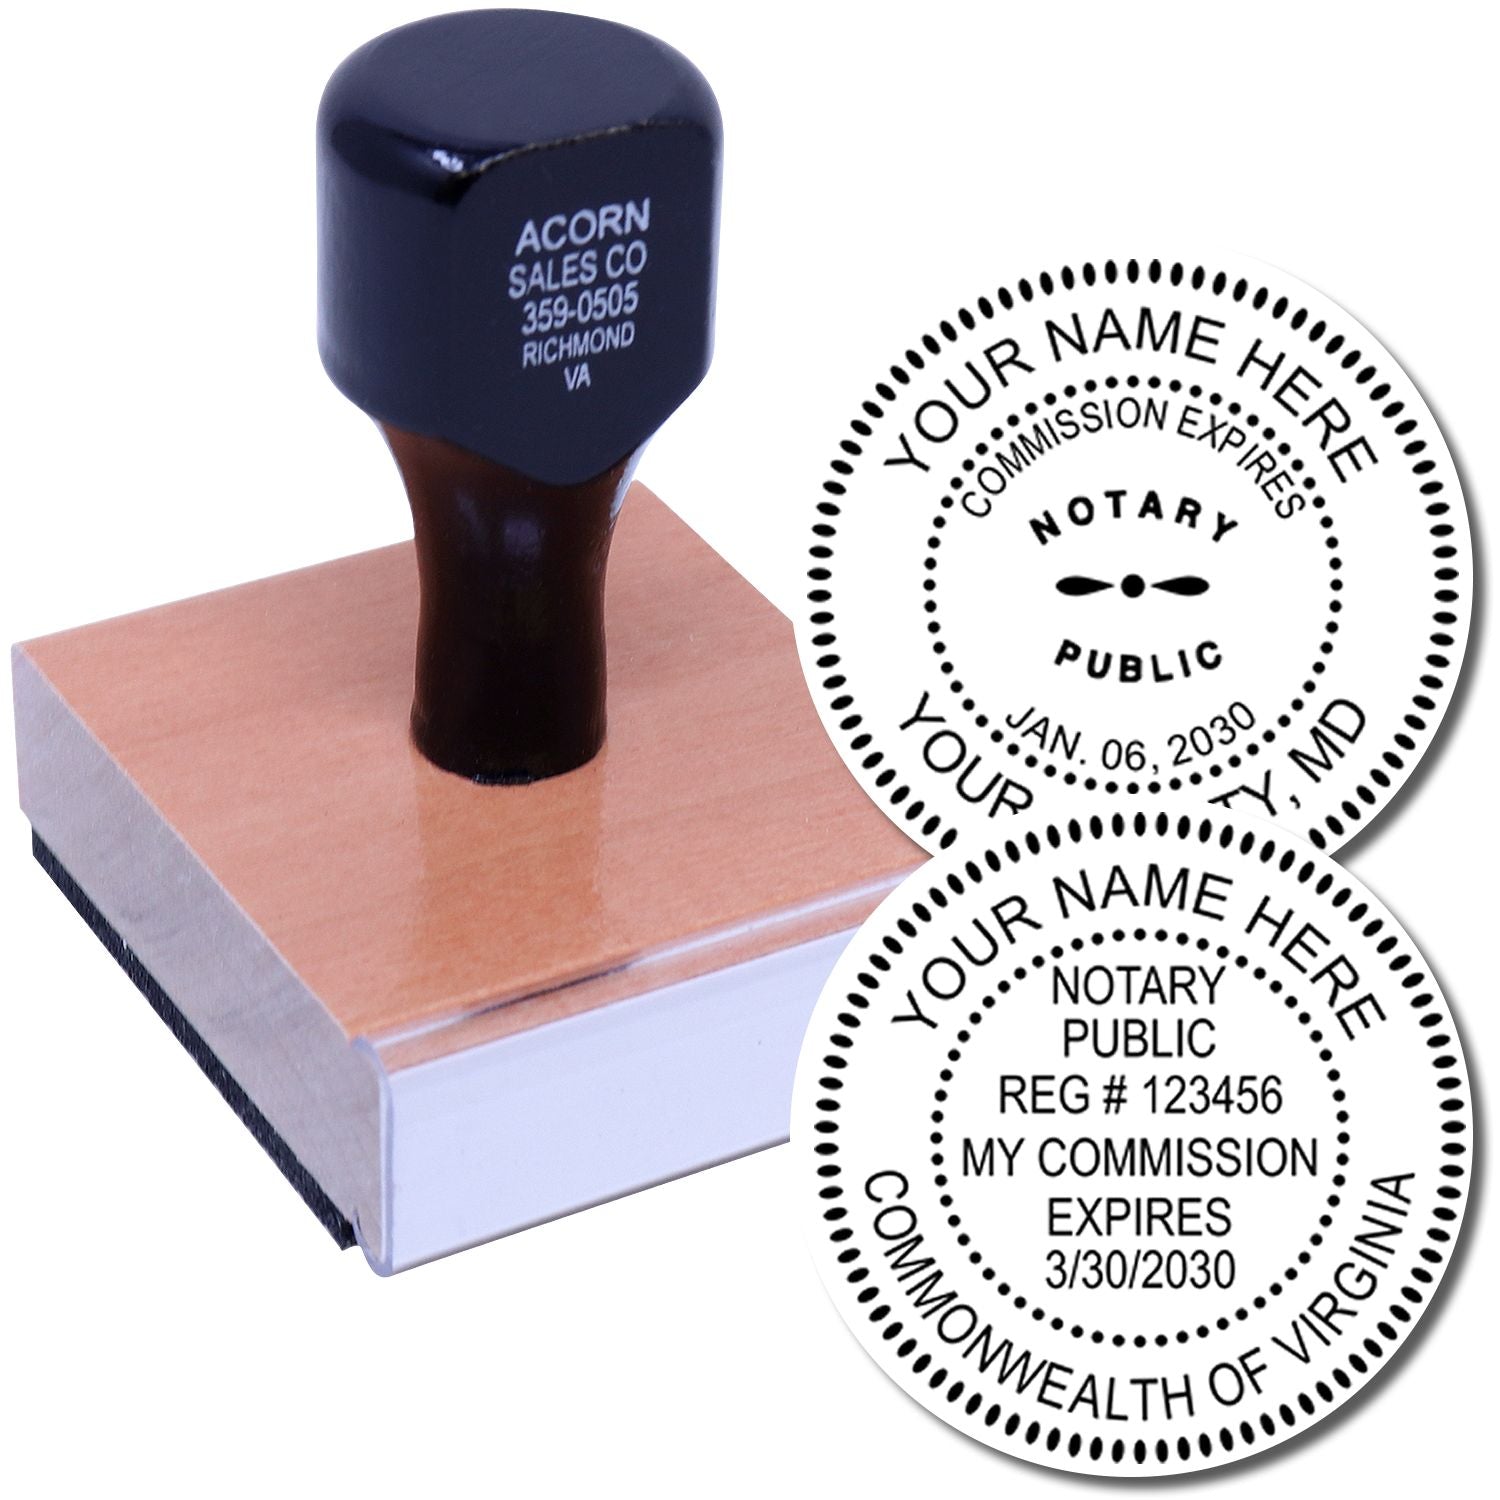 Regular Rubber Stamp of Notary Public Seal Main Image